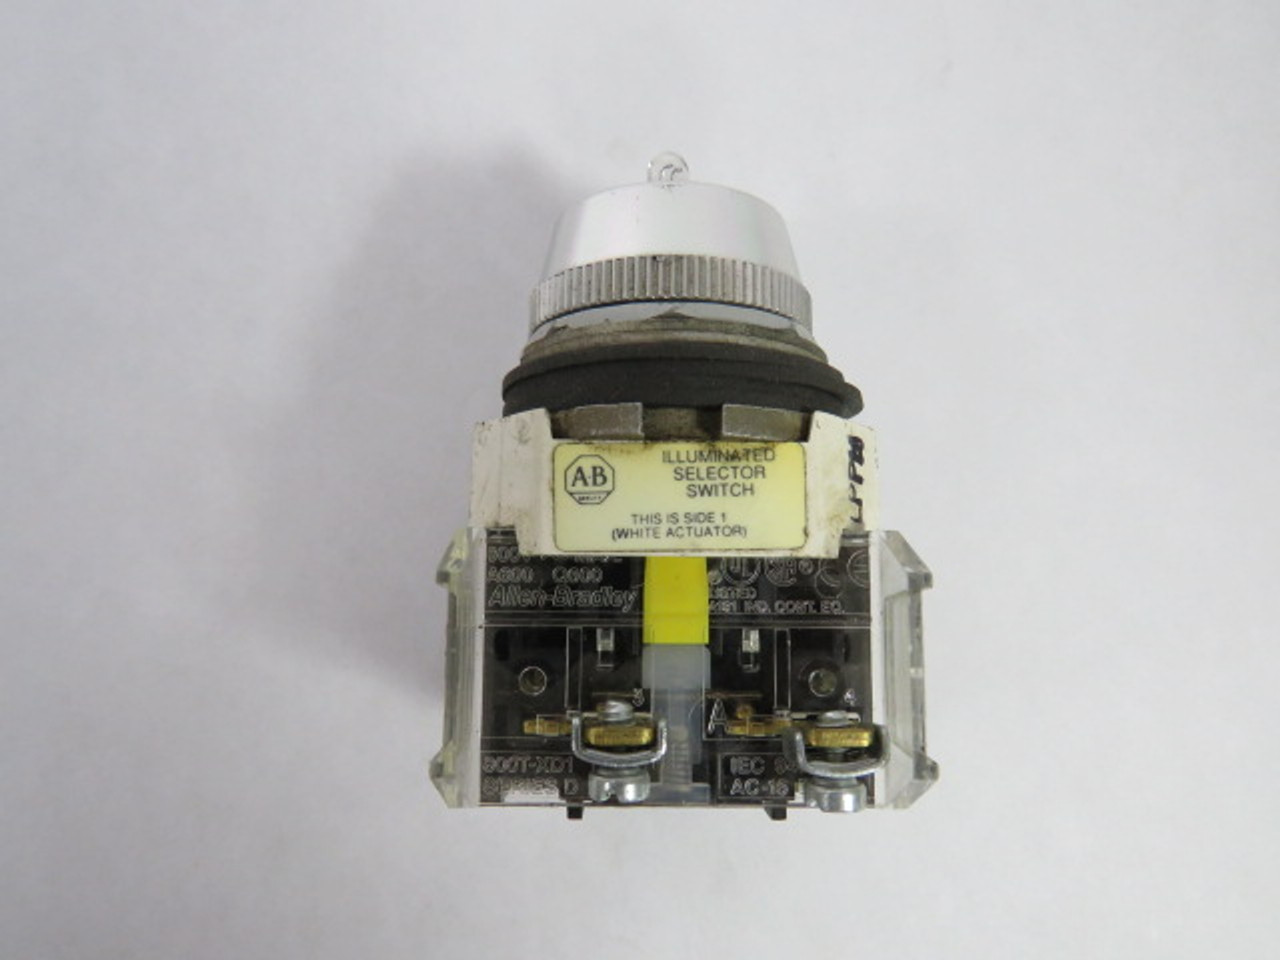 Allen-Bradley 800T-24HX2KB6DX Series T Selector Switch 1NO 2-Position USED